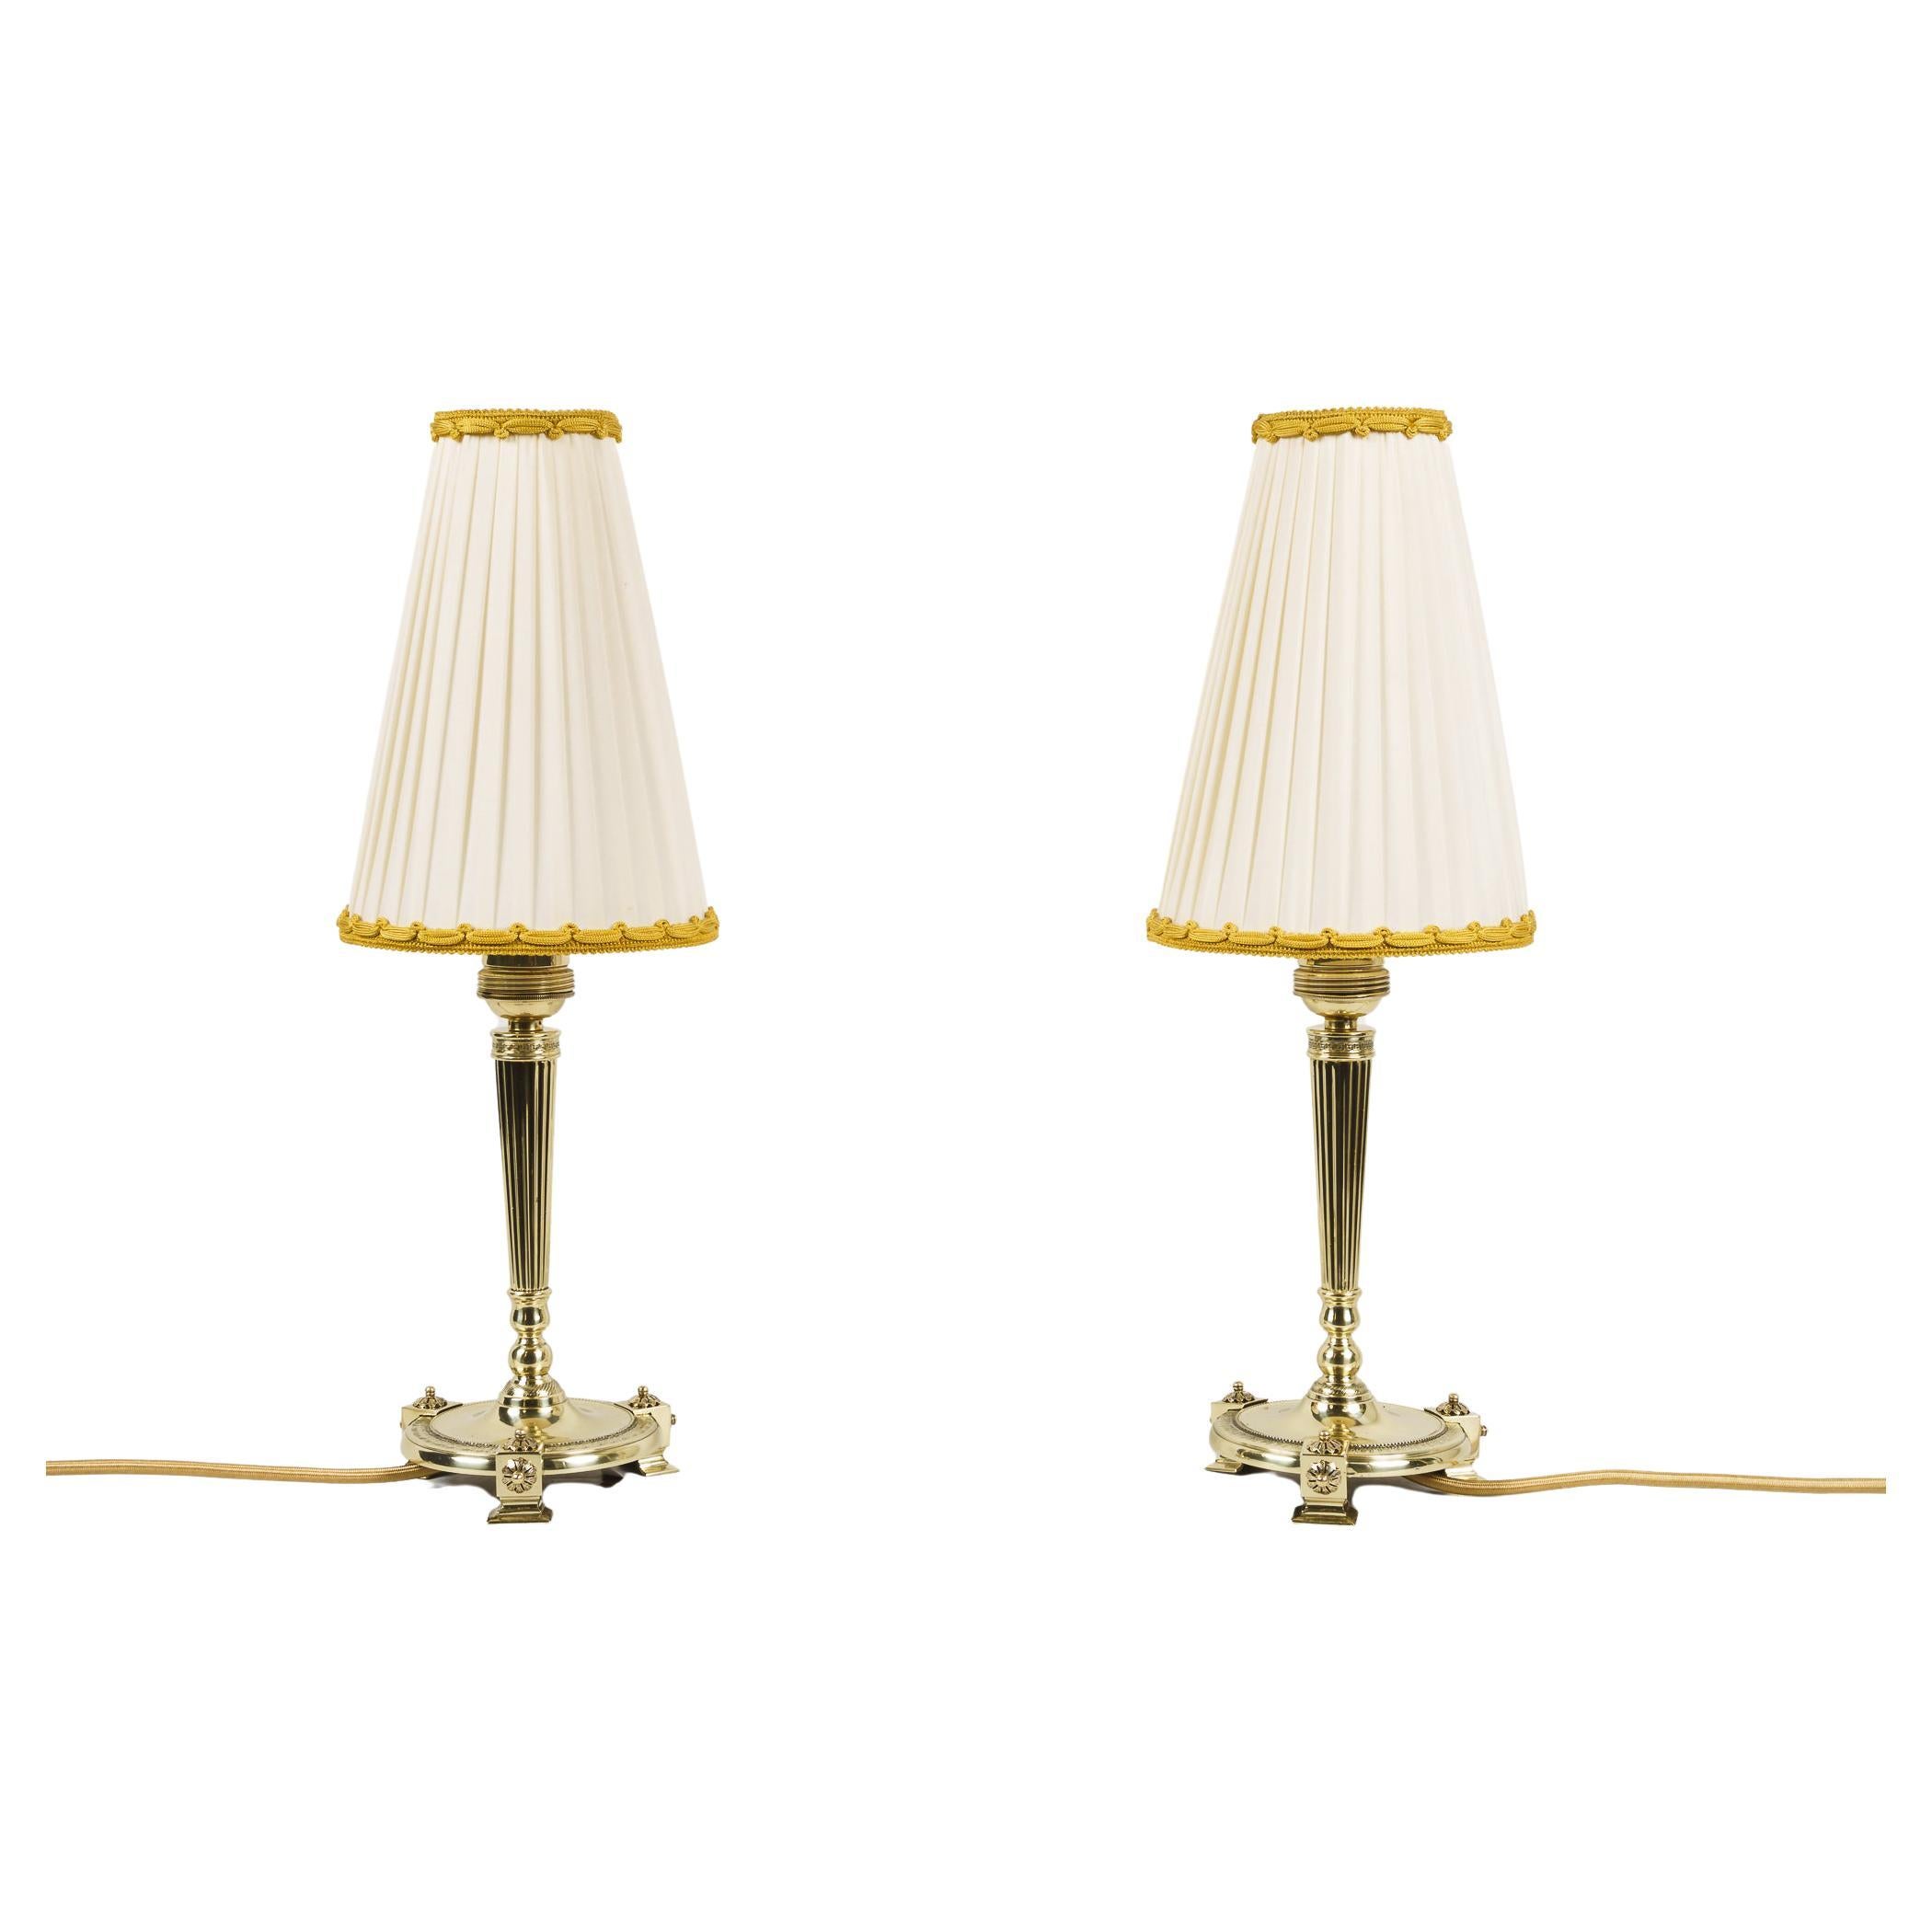 2 Art Deco Table Lamps, Vienna, 1920s